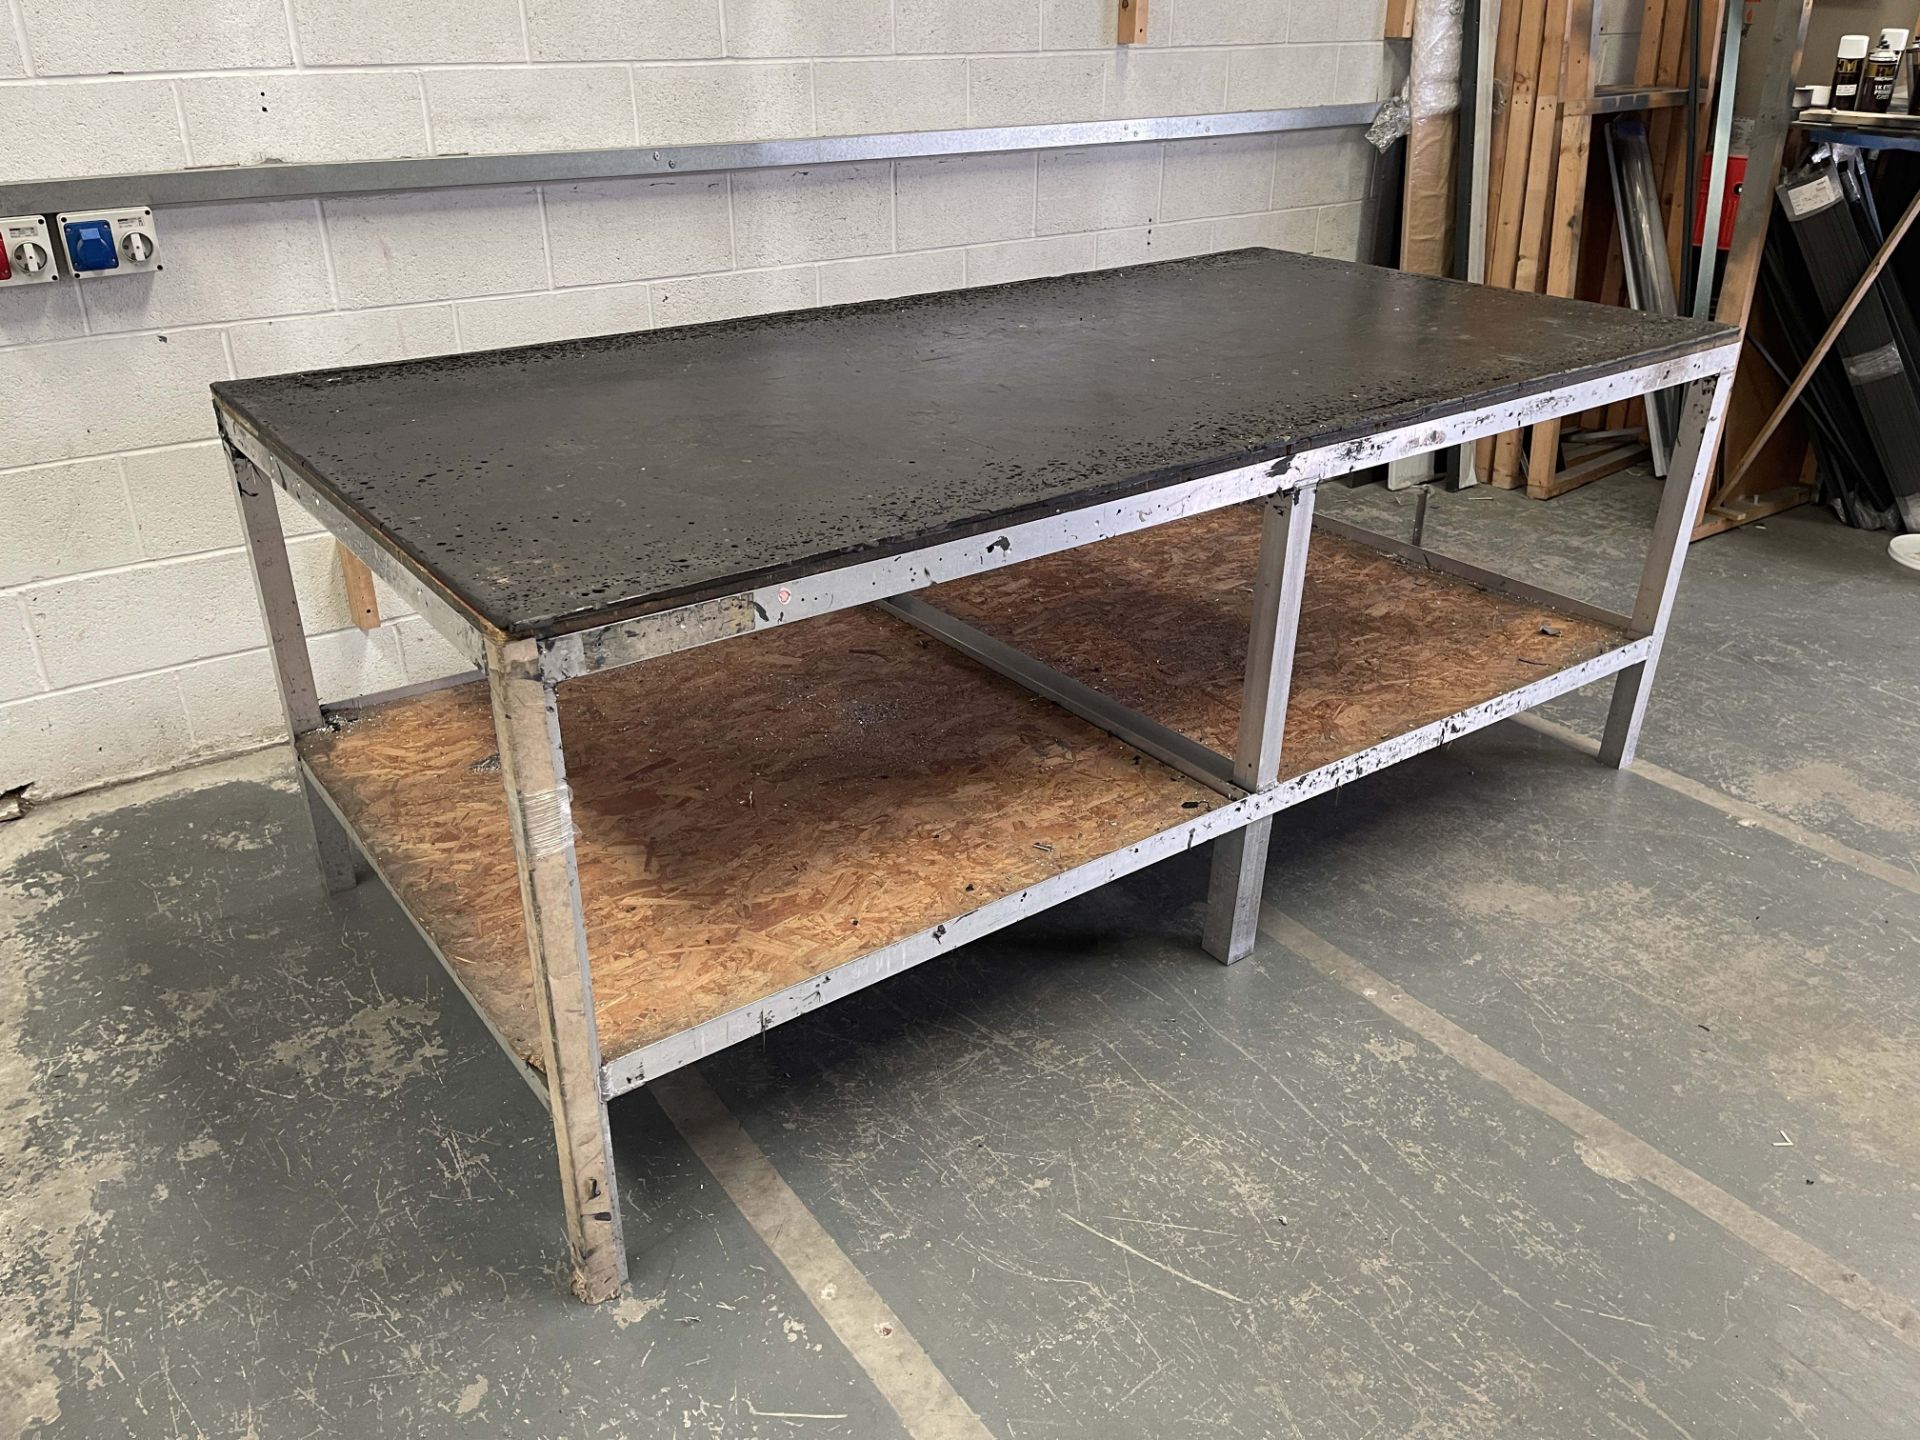 Aluminium Workbench With Rubber Top. Size: 8' x 4' x 3'1" High. - Image 3 of 3